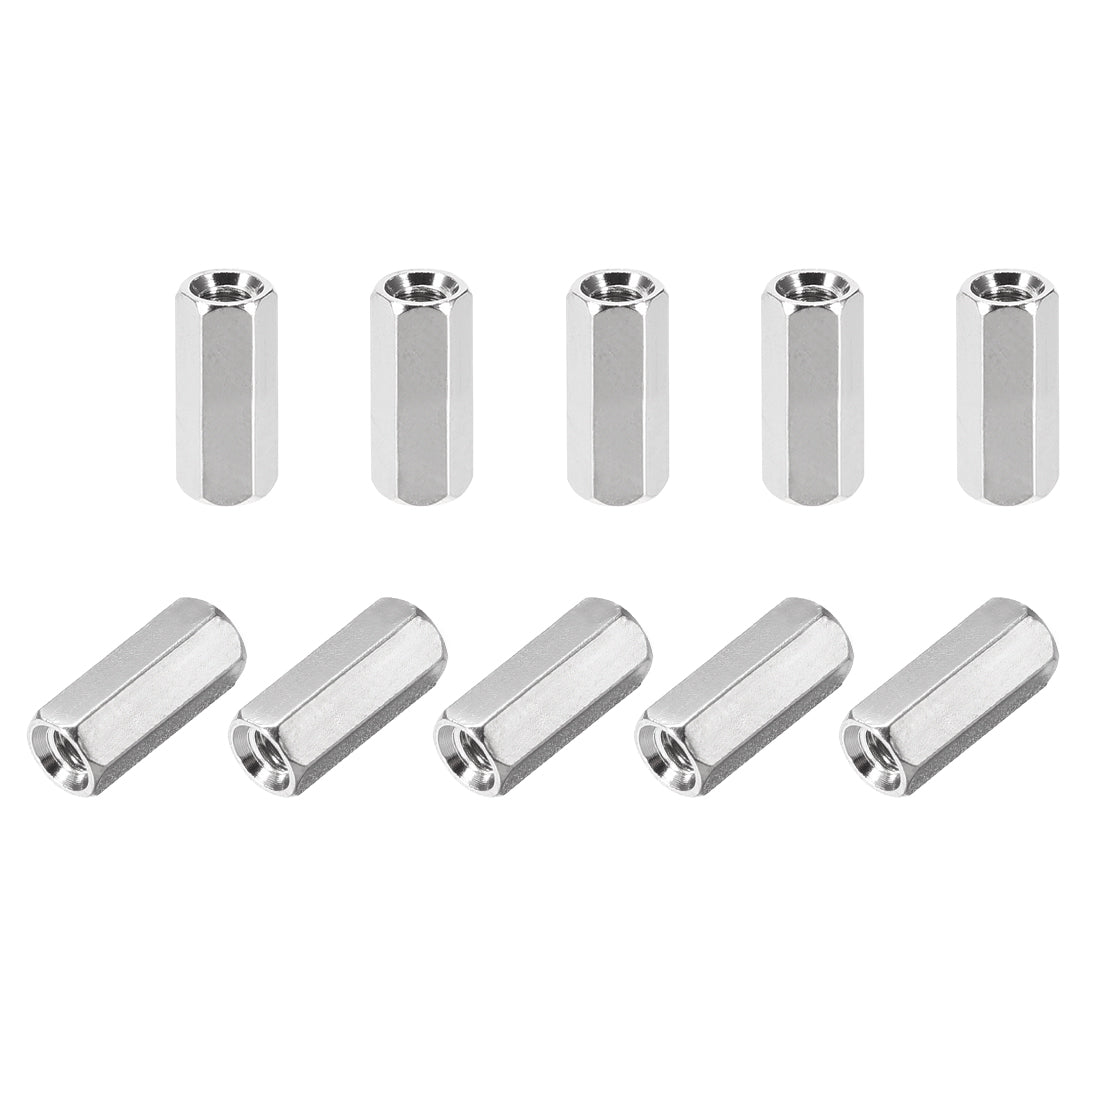 Uxcell Uxcell M3 x 45mm Female to Female Hex Nickel Plated Spacer Standoff 20pcs